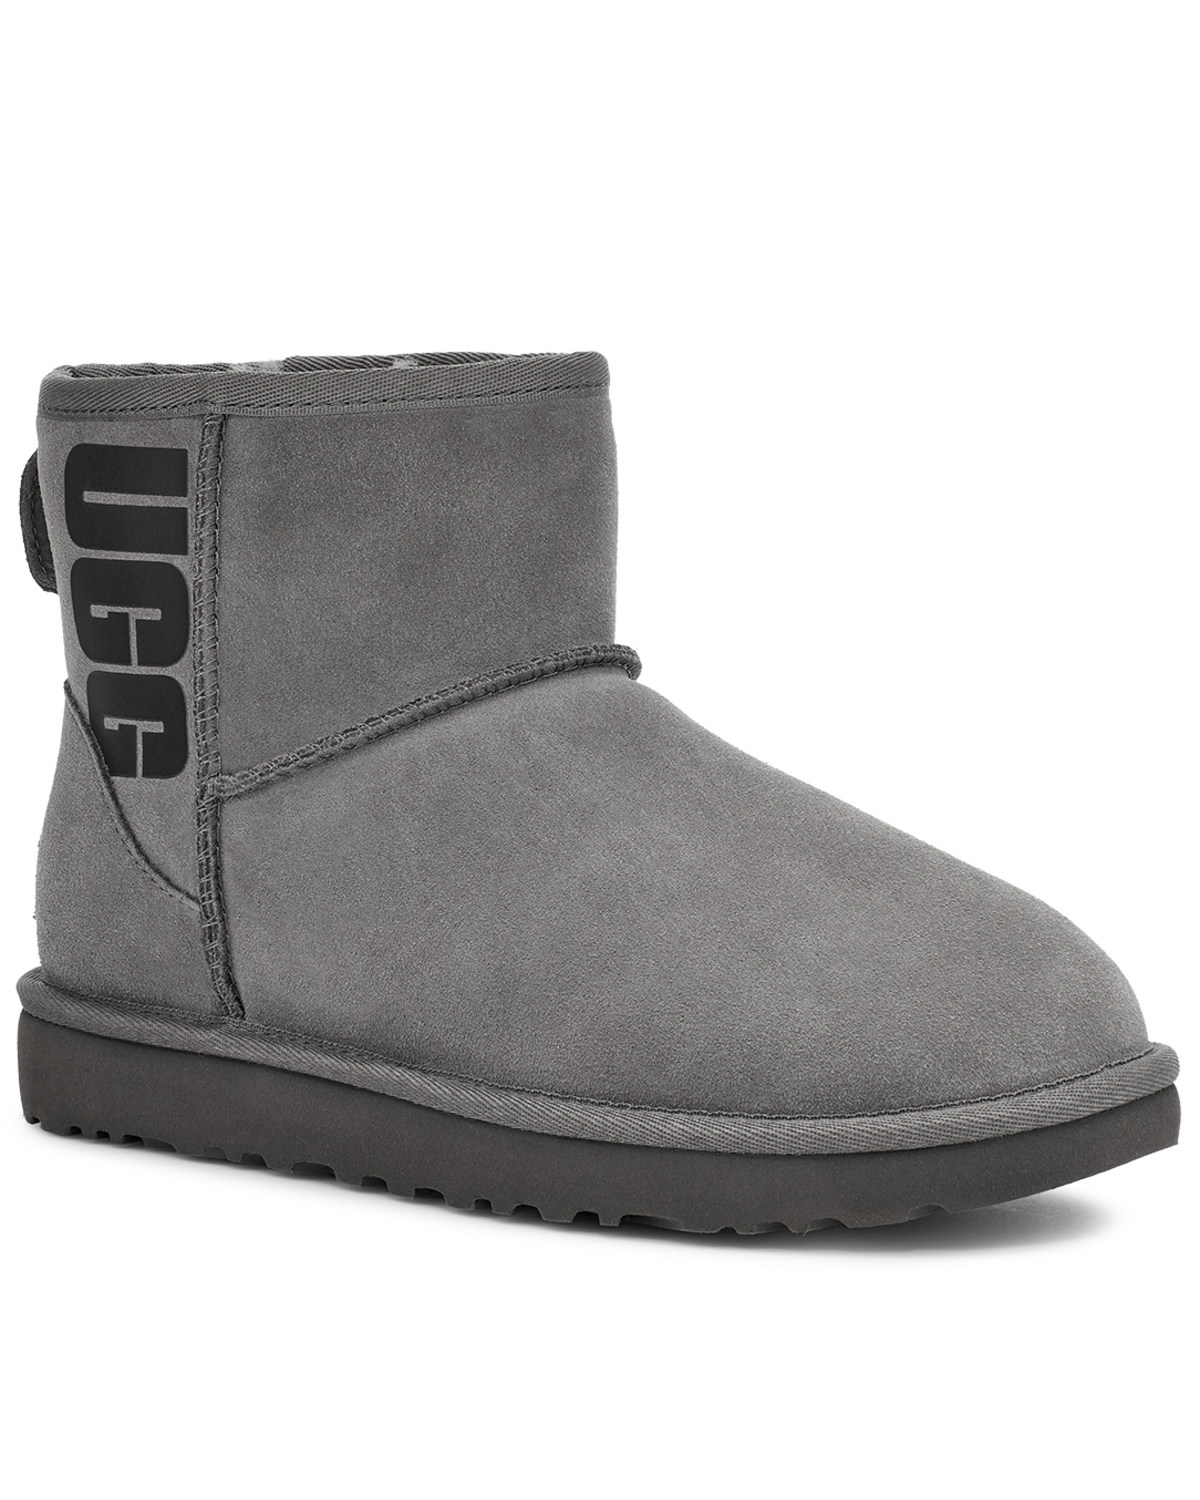 grey uggs boots